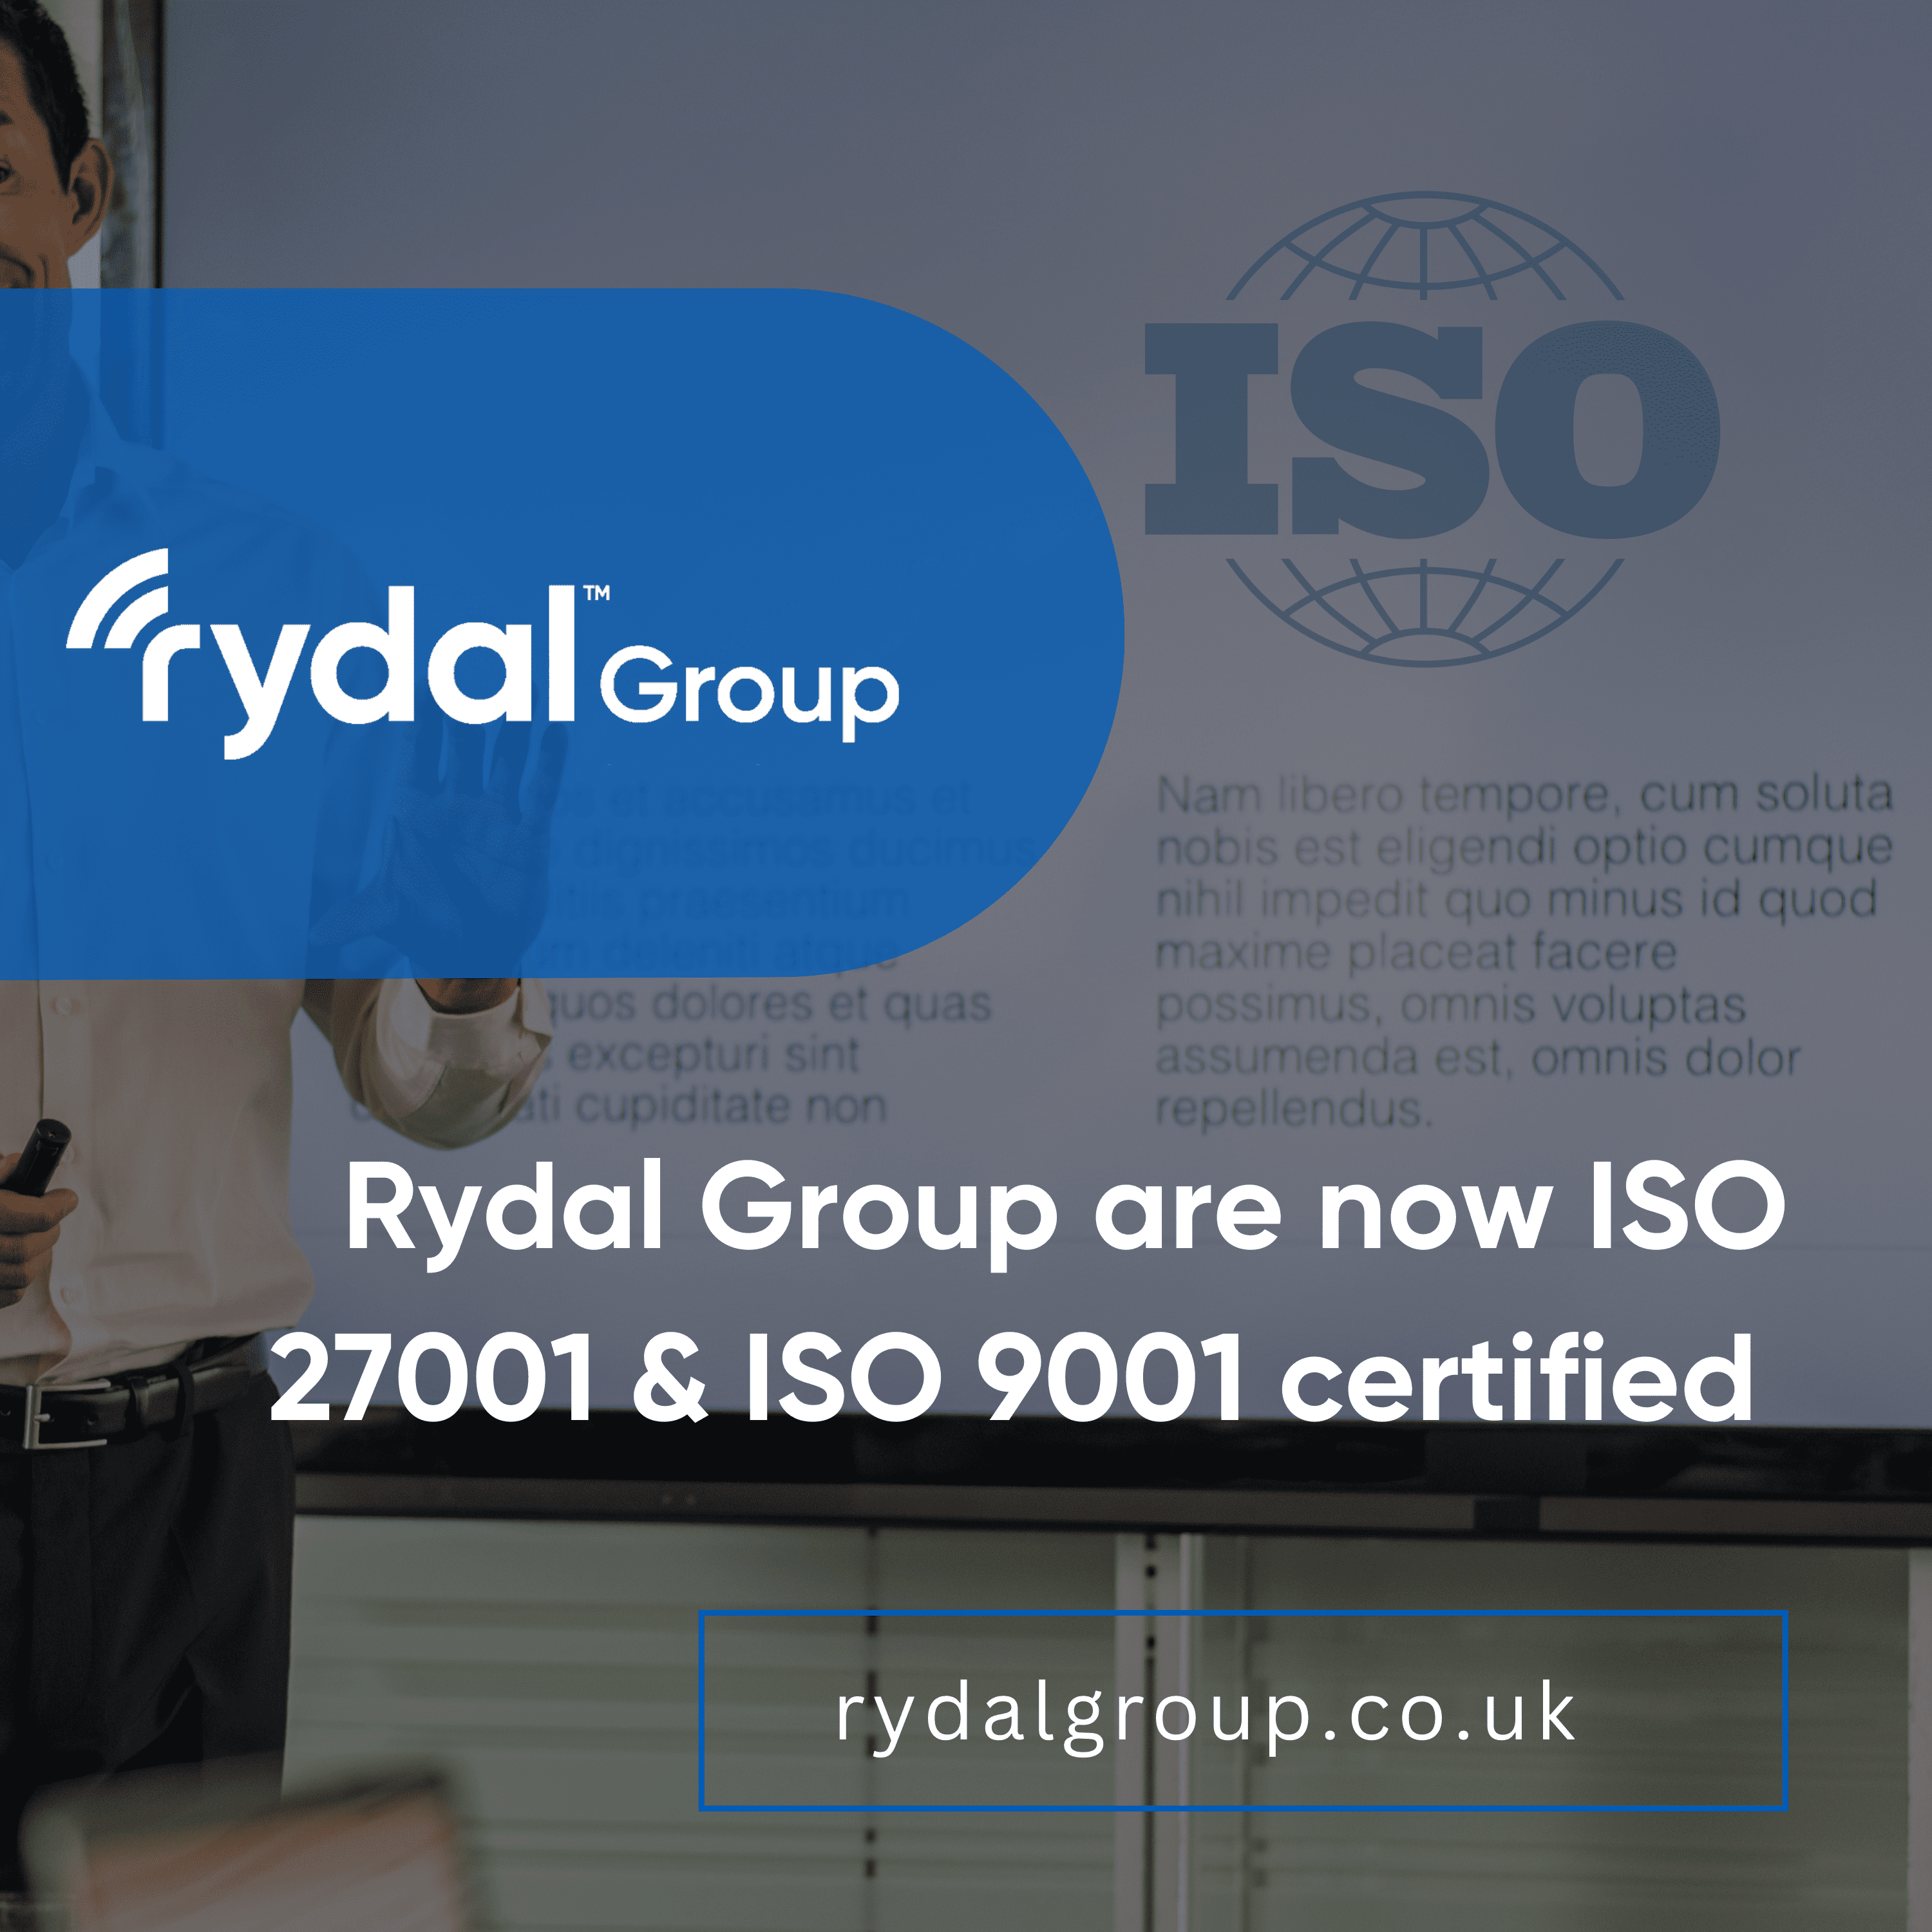 Rydal Group Achieves ISO 9001 & 27001 Certification